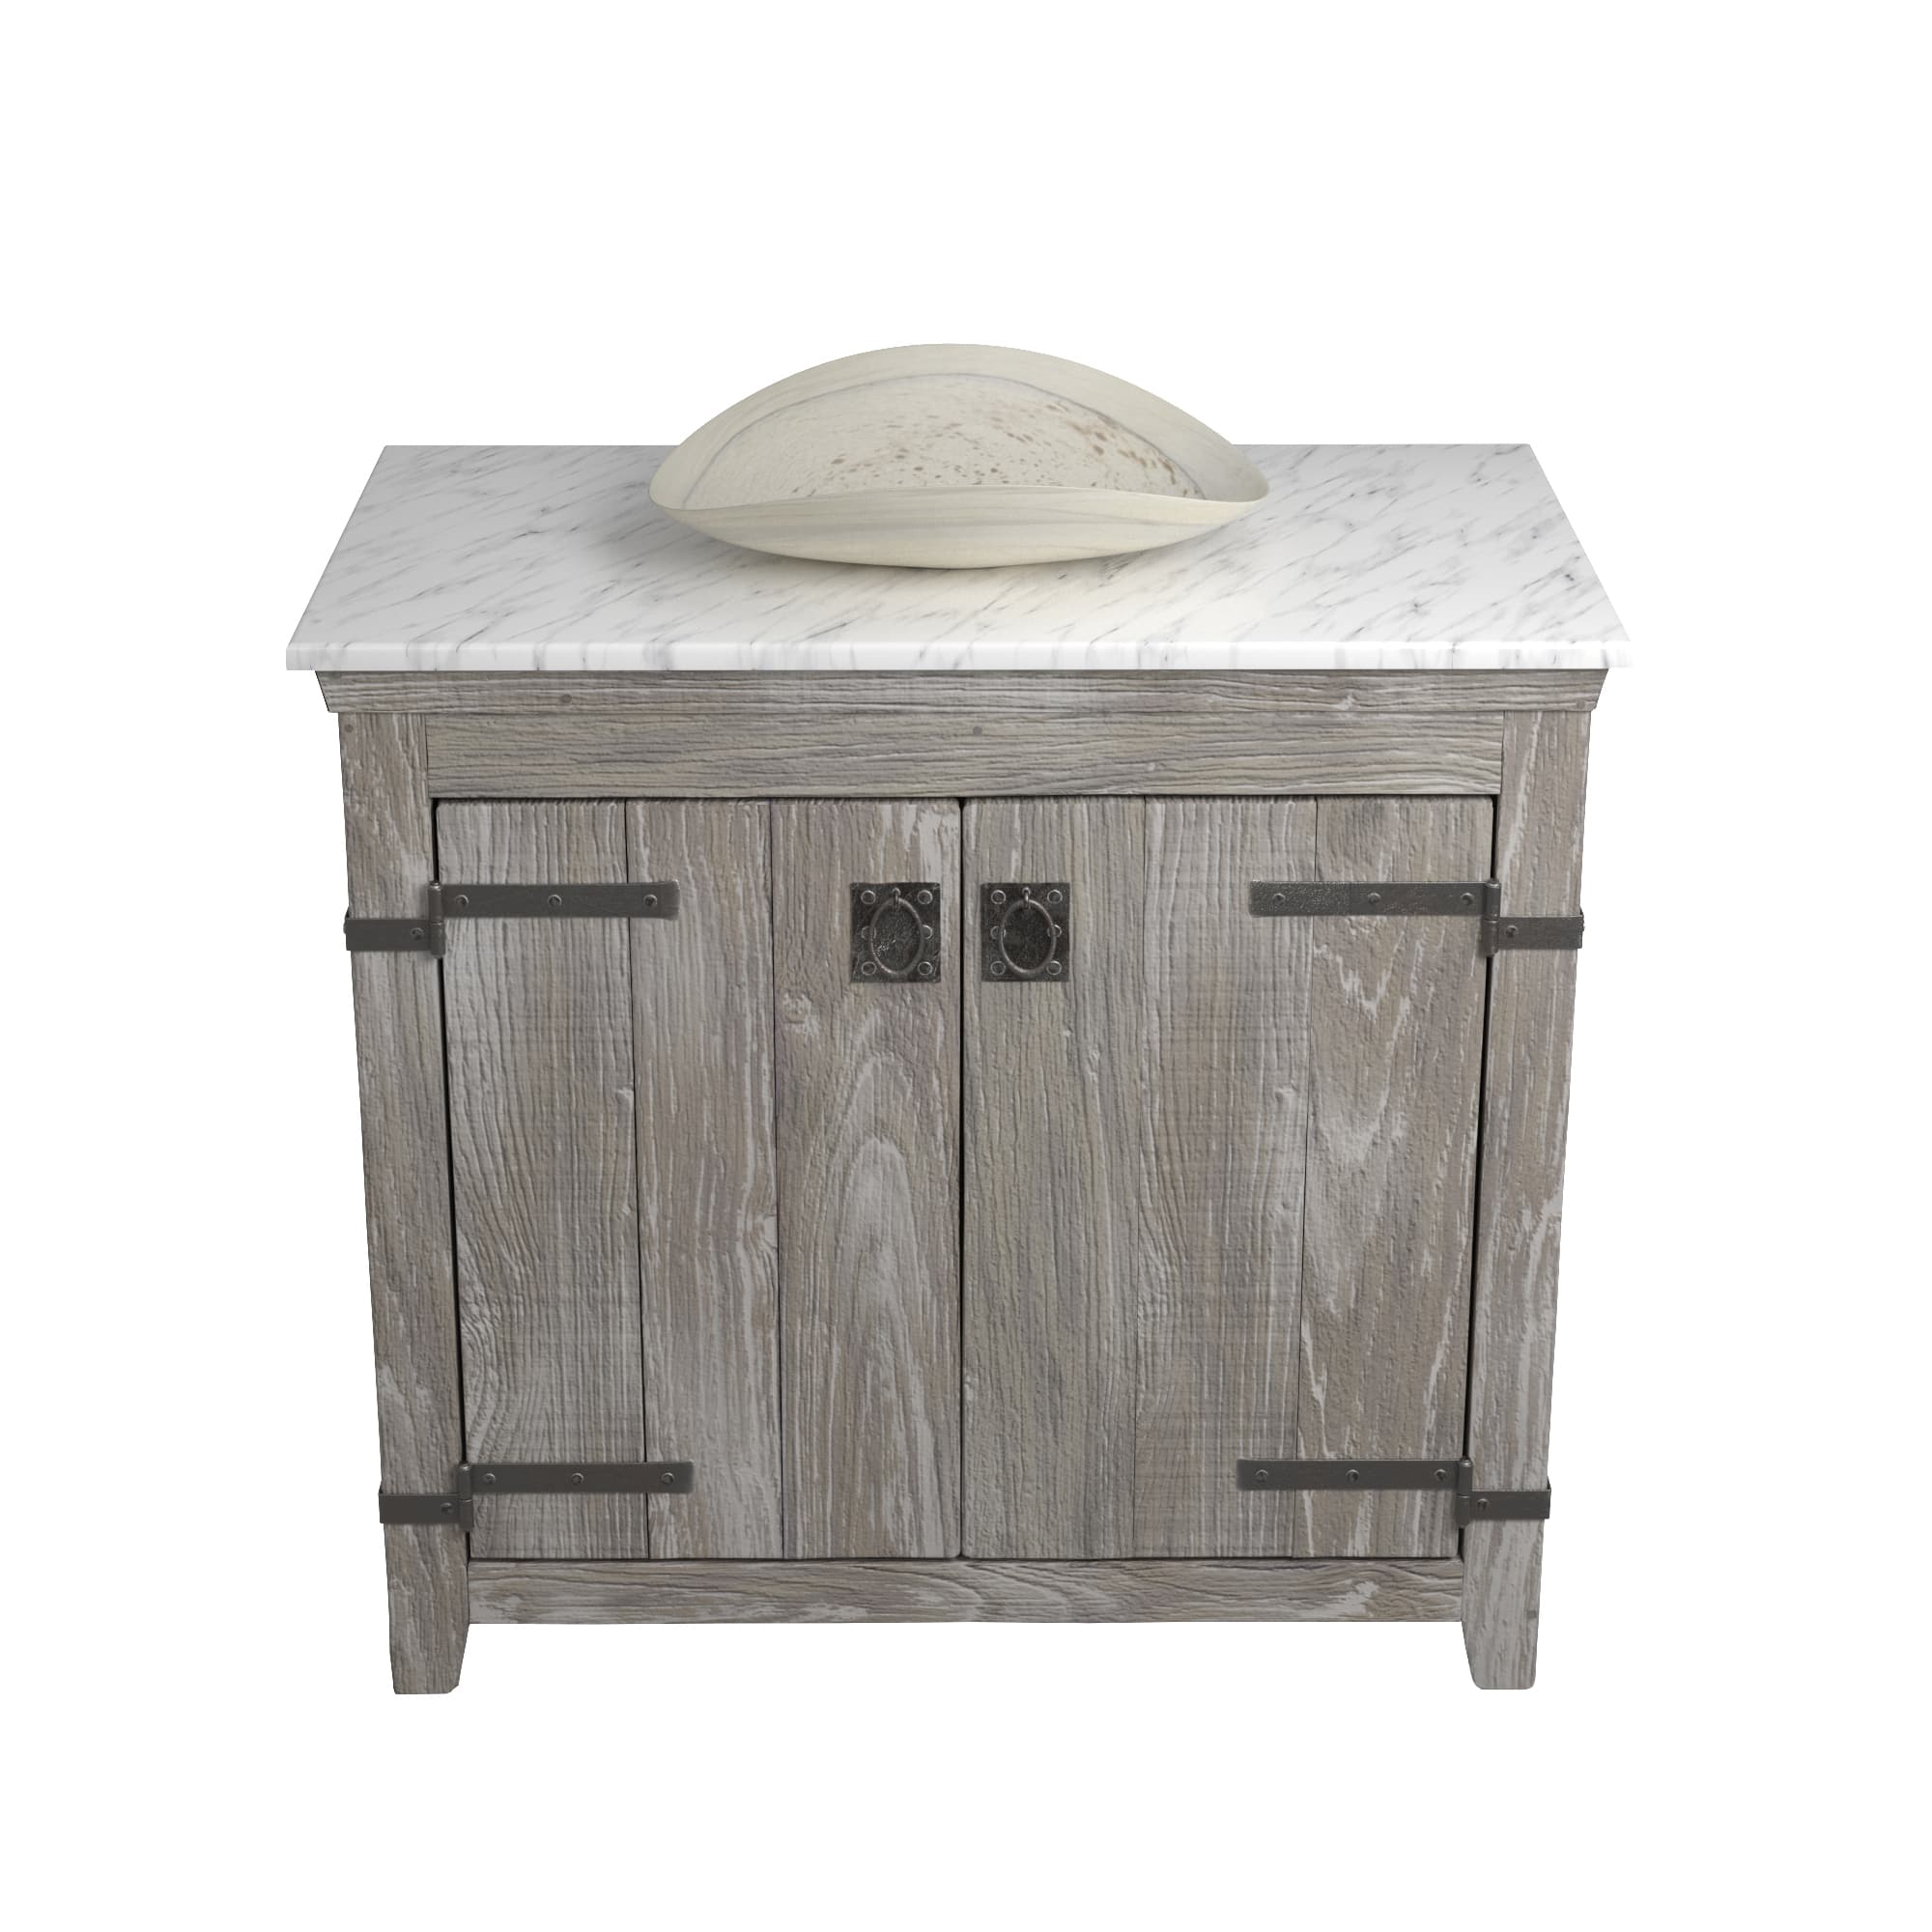 Native Trails 36" Americana Vanity in Driftwood with Carrara Marble Top and Sorrento in Beachcomber, No Faucet Hole, BND36-VB-CT-MG-112